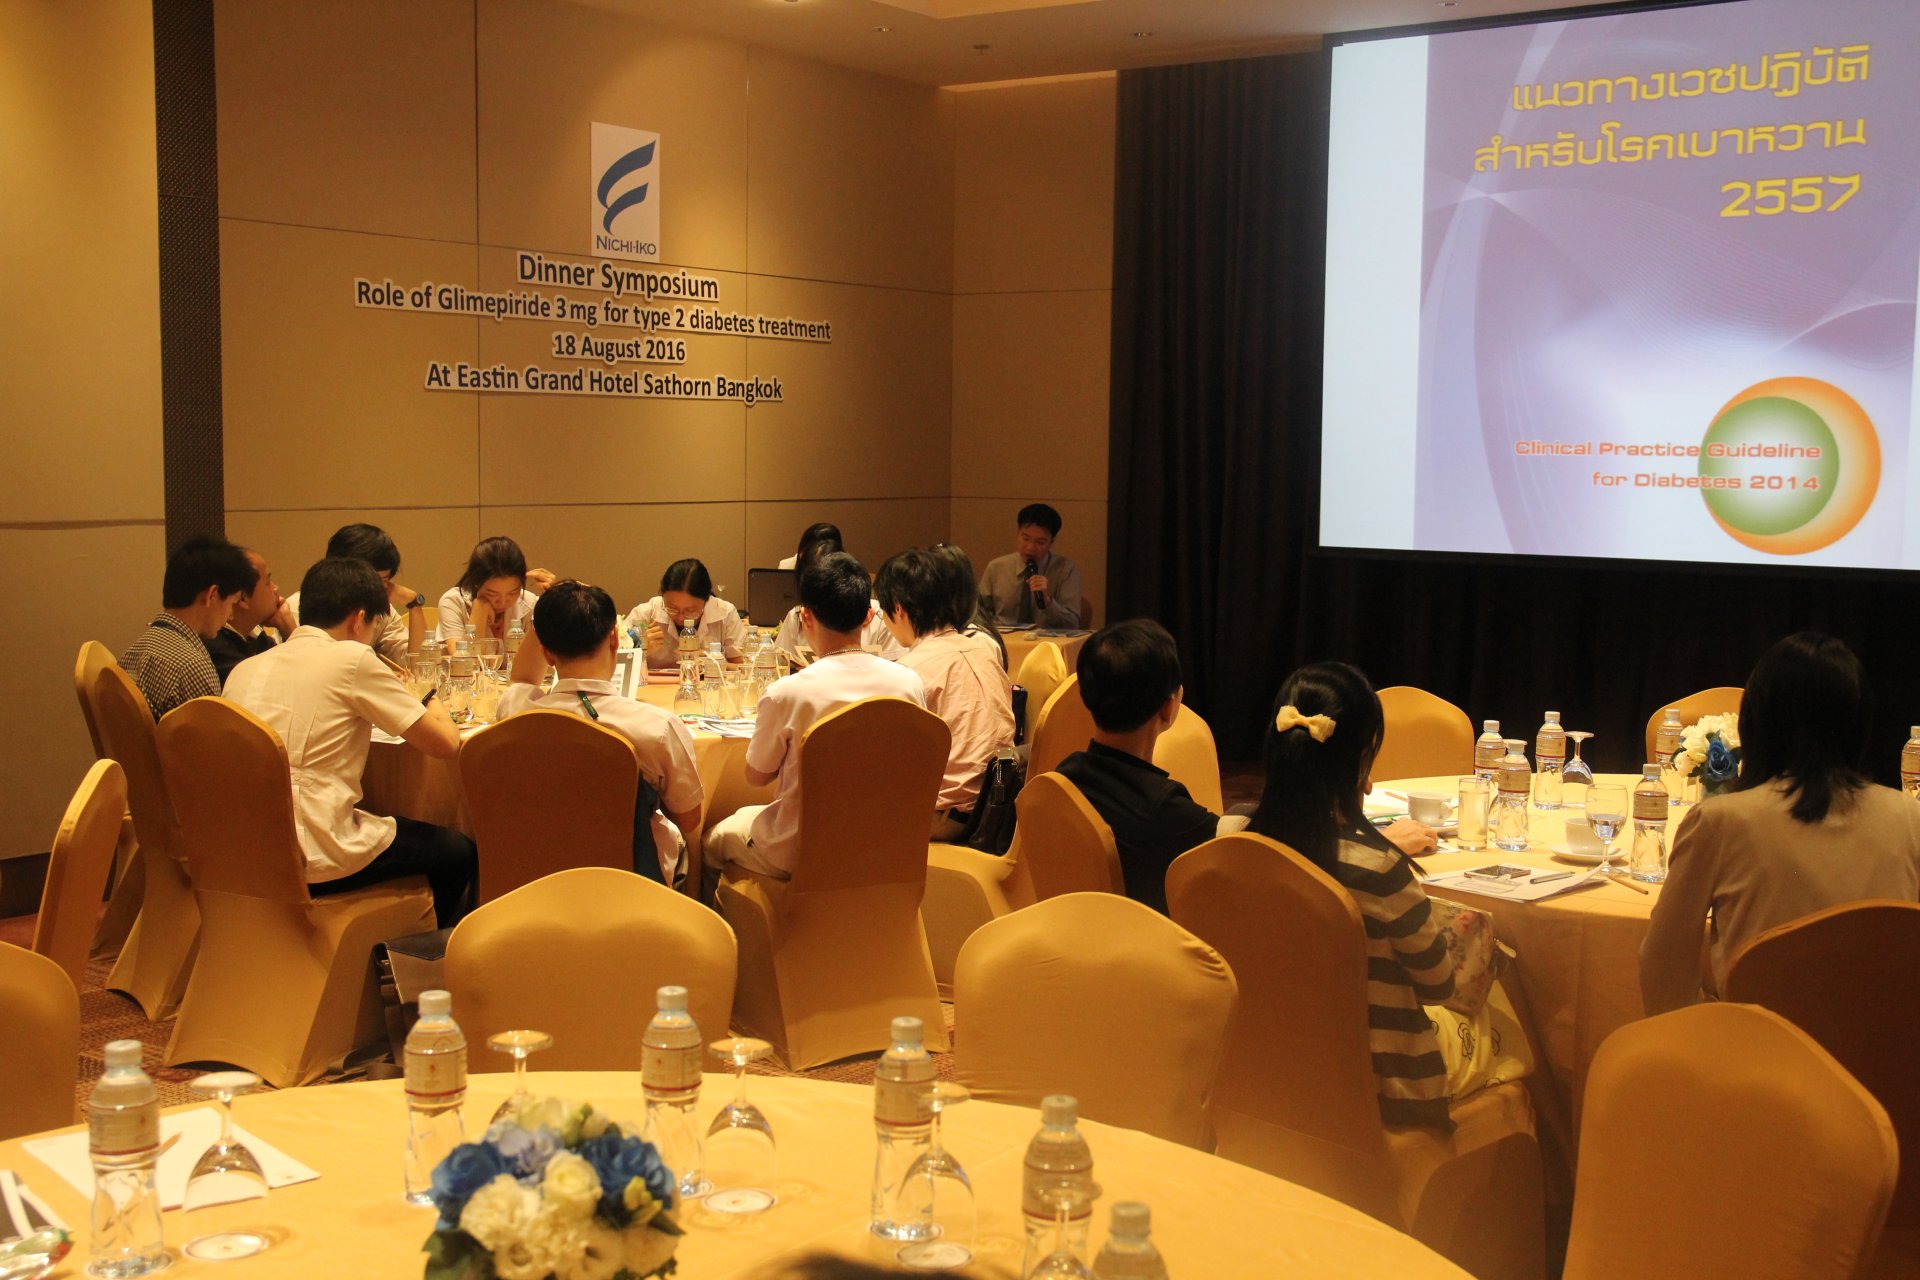 Dinner Symposium & Booth Exhibition at the Annual Meeting of the Diabetes Association of Thailand 2016